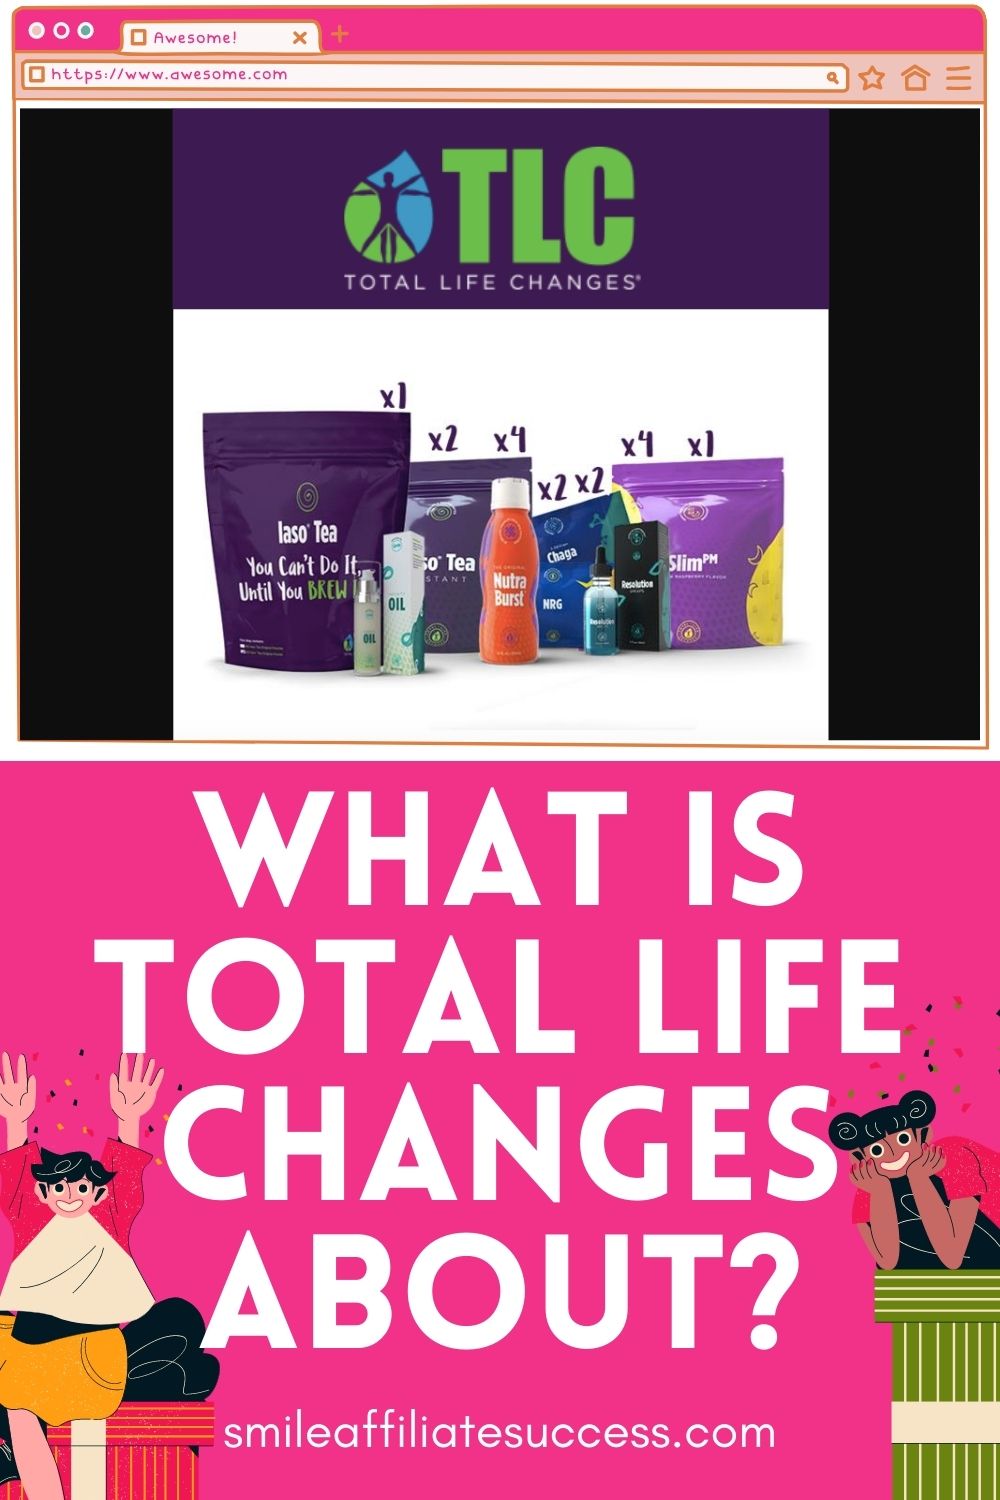 What Is Total Life Changes About?